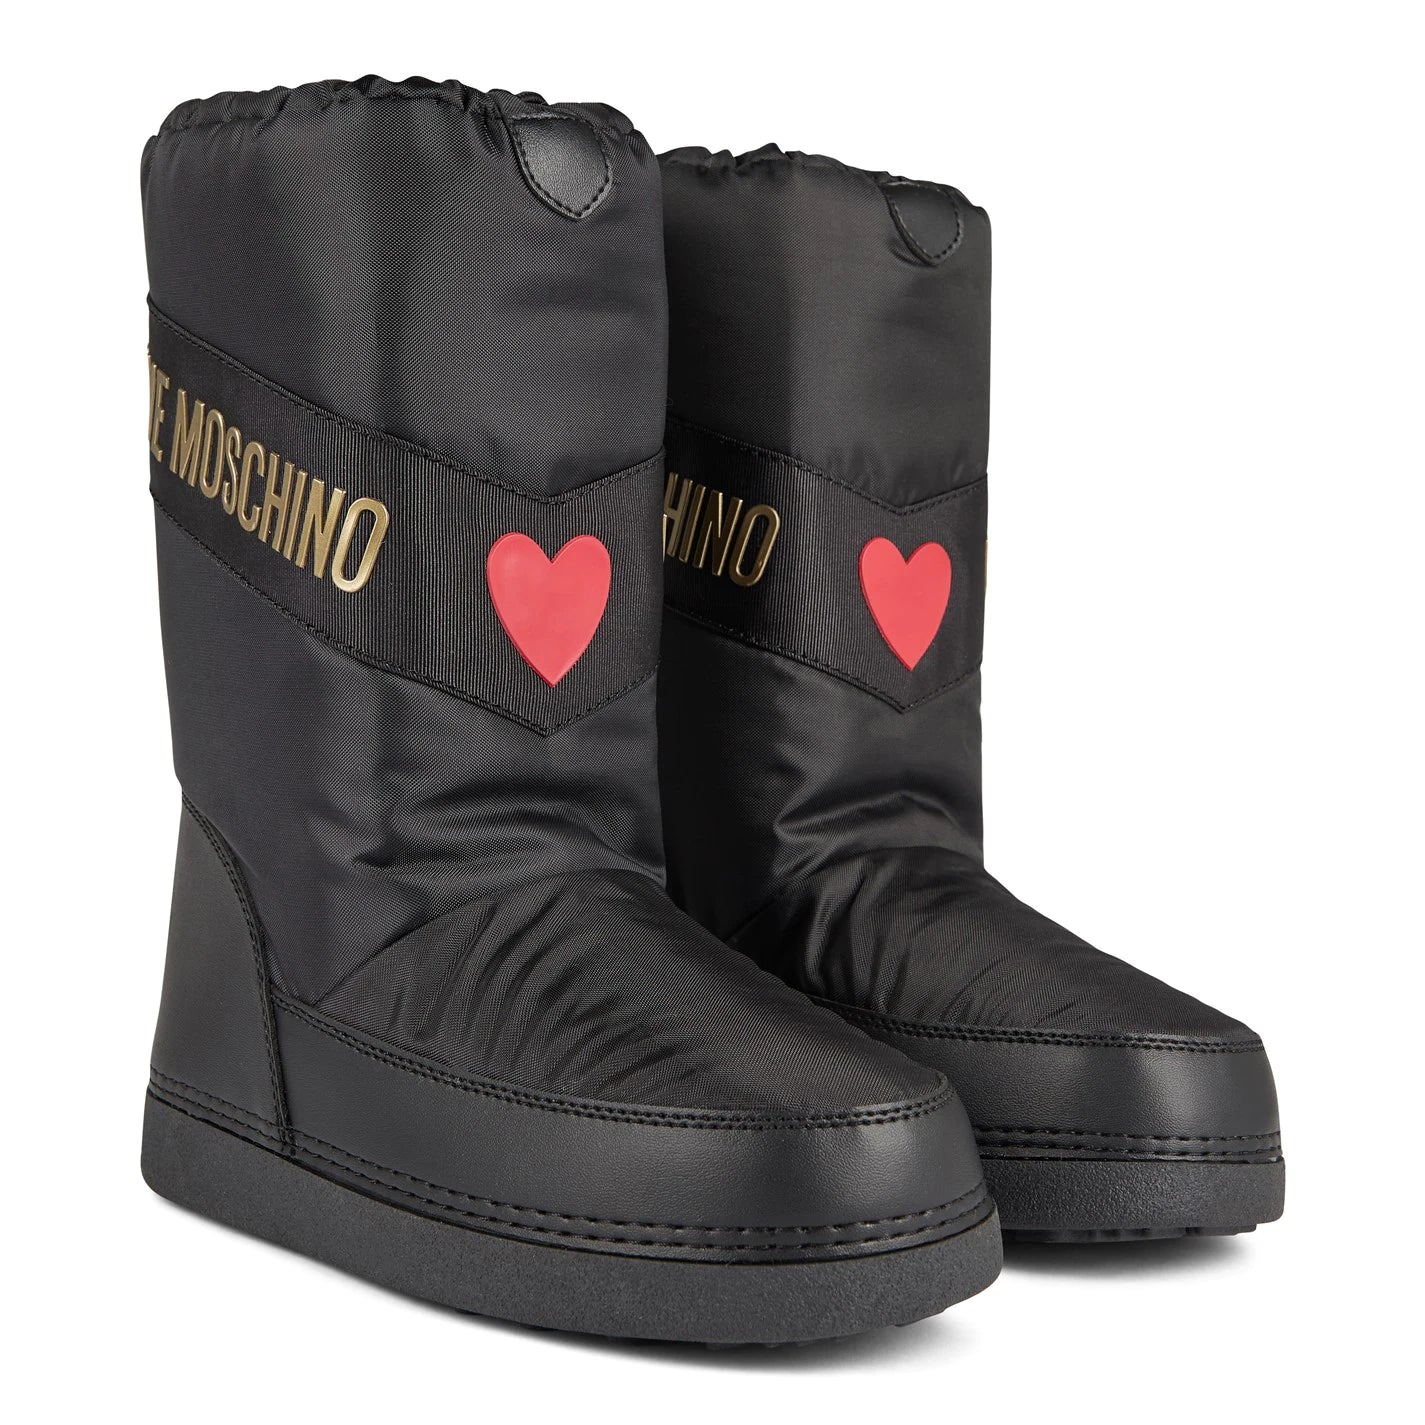 Womens Love Moschino Snow Boots - DANYOUNGUK